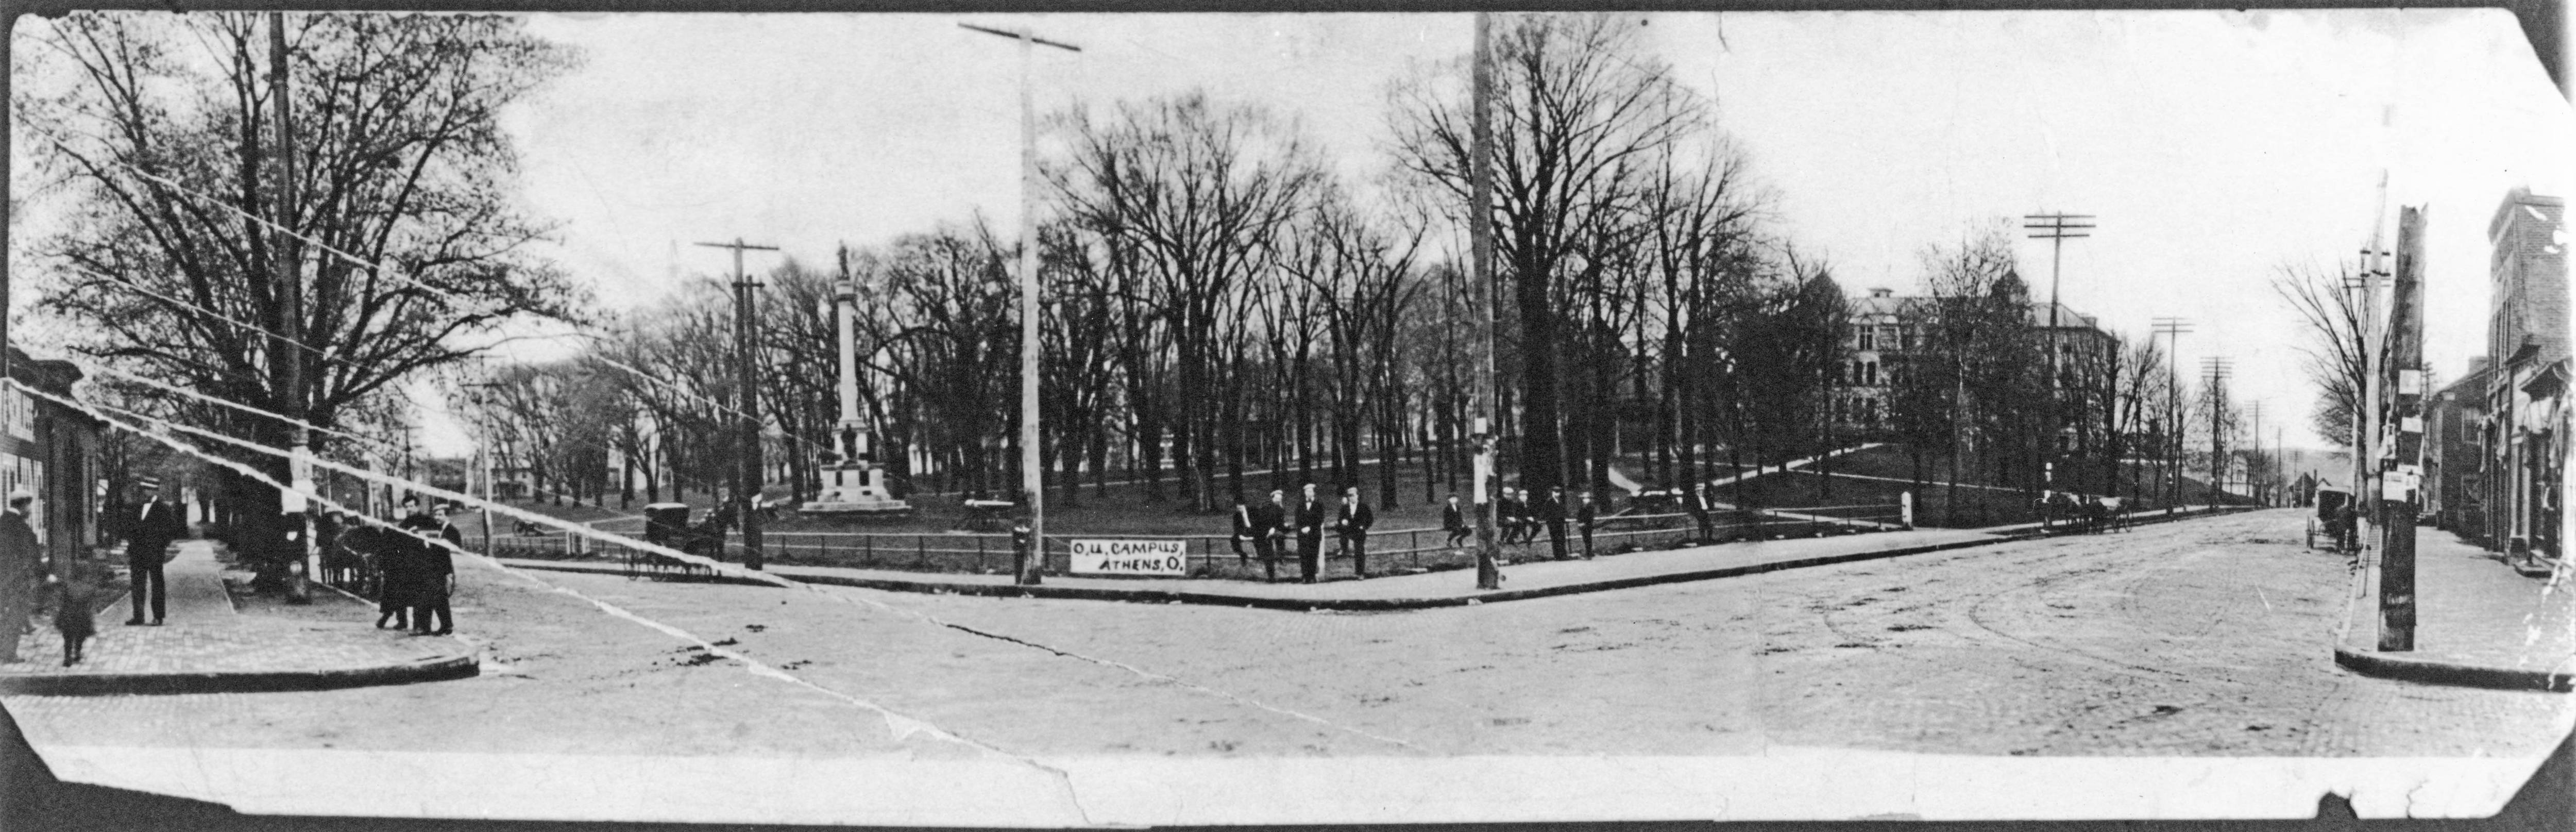 This panoramic view of Union and Court Streets, circa 1907, shows College Green and the Soldiers and Sailors monument on the left. Young boys sit on a wooden fence where the Alumni Gateway would be built less than a decade later. Photo courtesy the Mahn Center for Archives & Special Collections